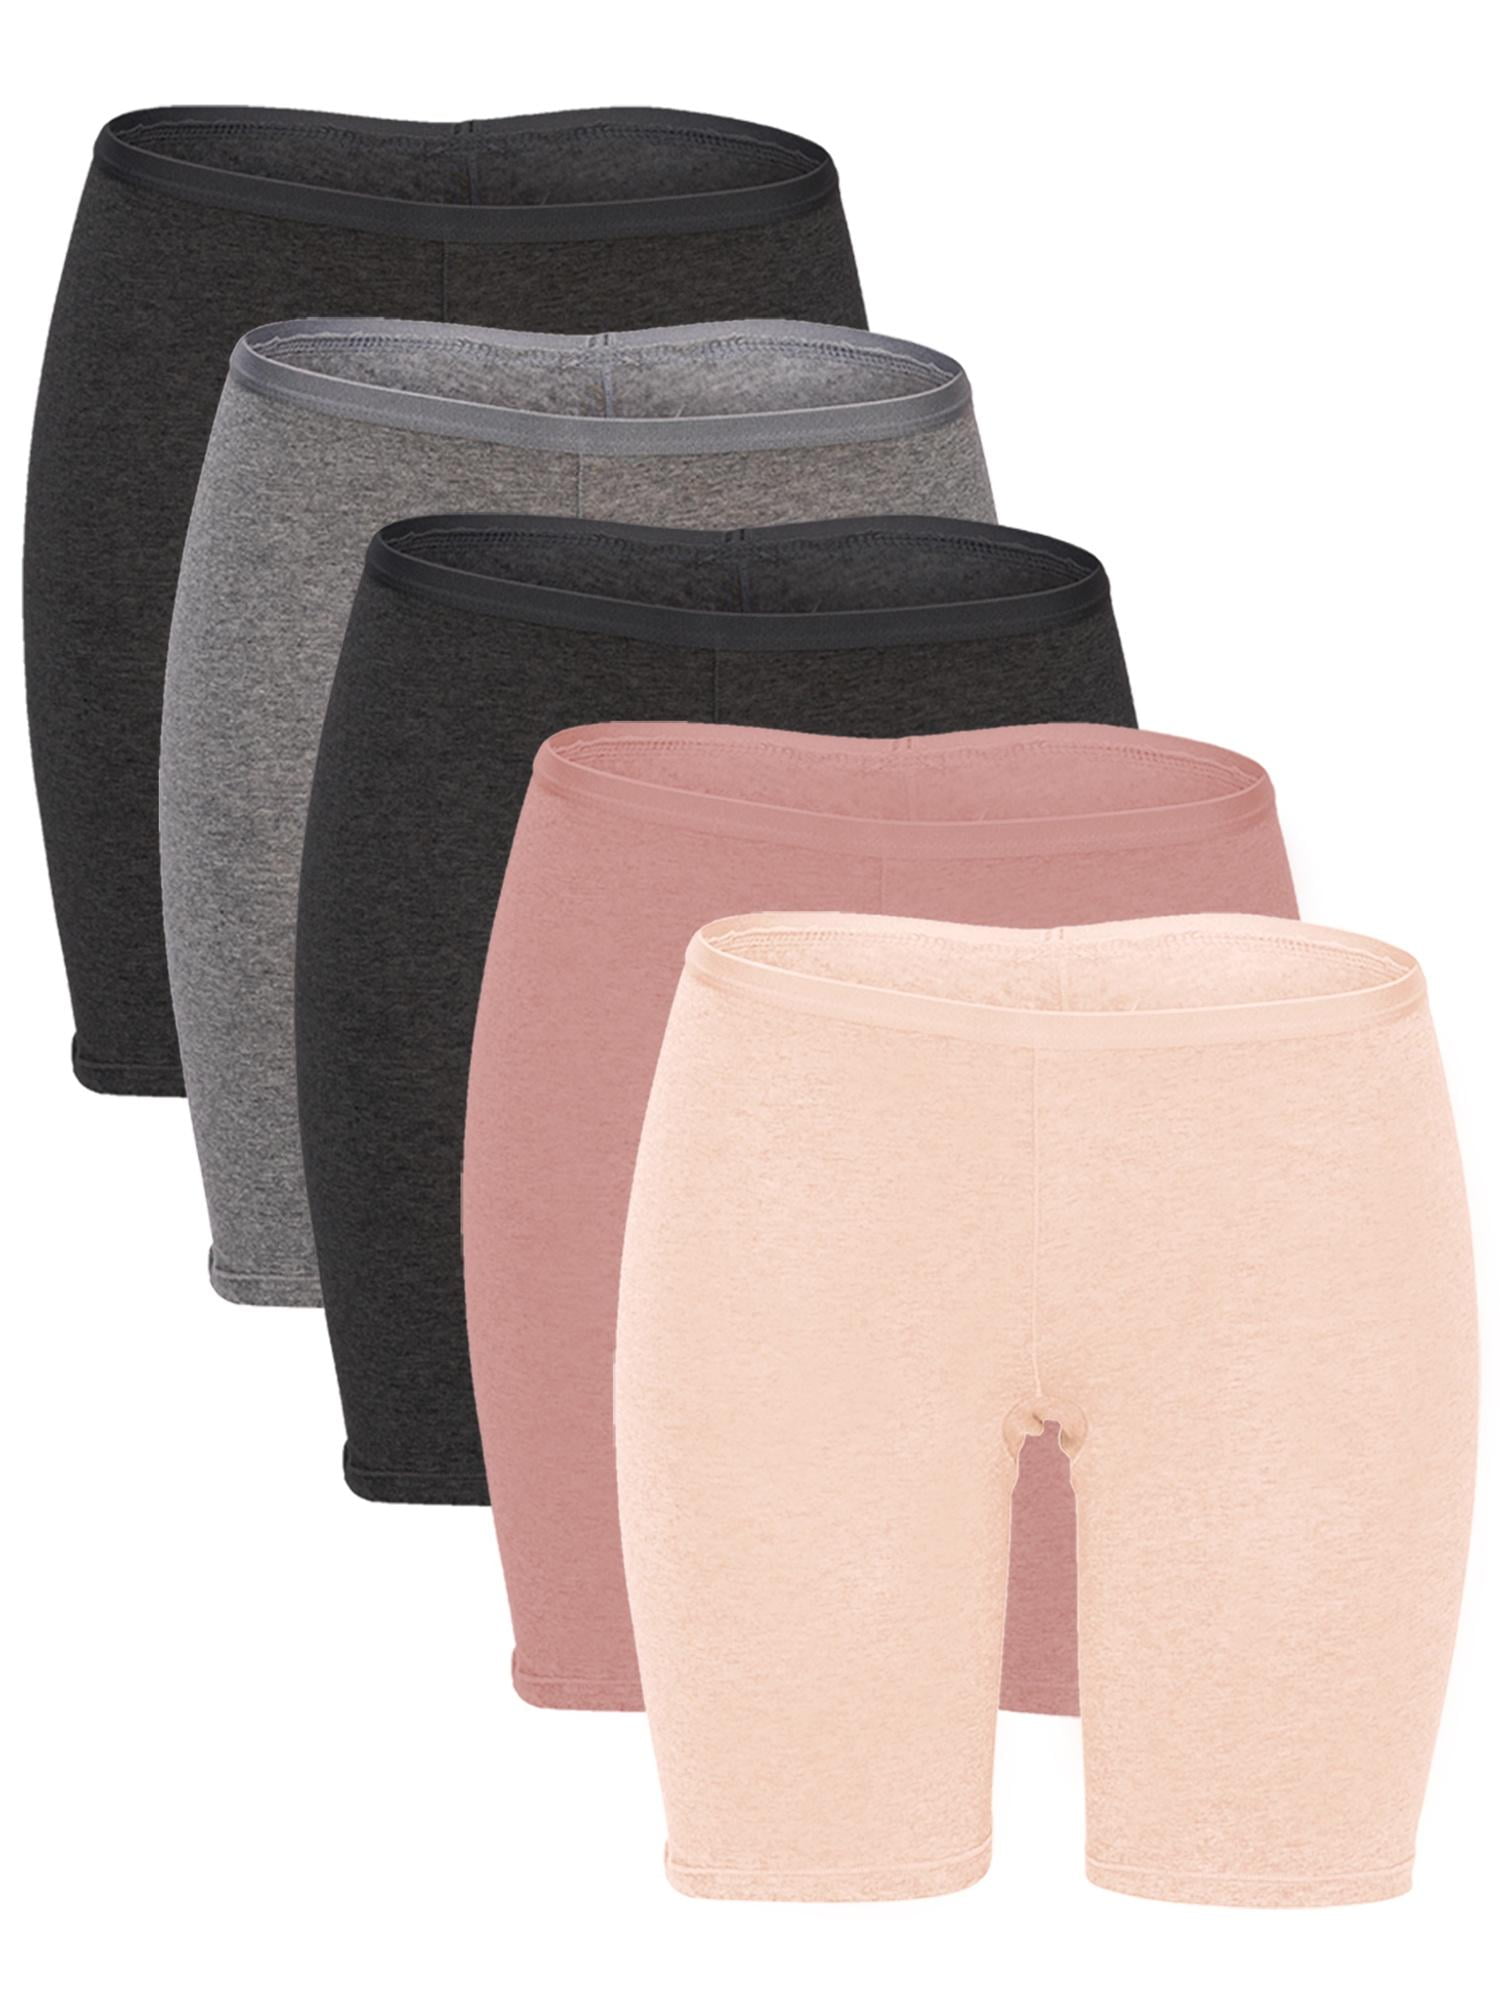 Sexy Cotton Womens Boxer Panty Shorts Neutral Briefs For Lesbian Lingerie  220511 From Long005, $6.01